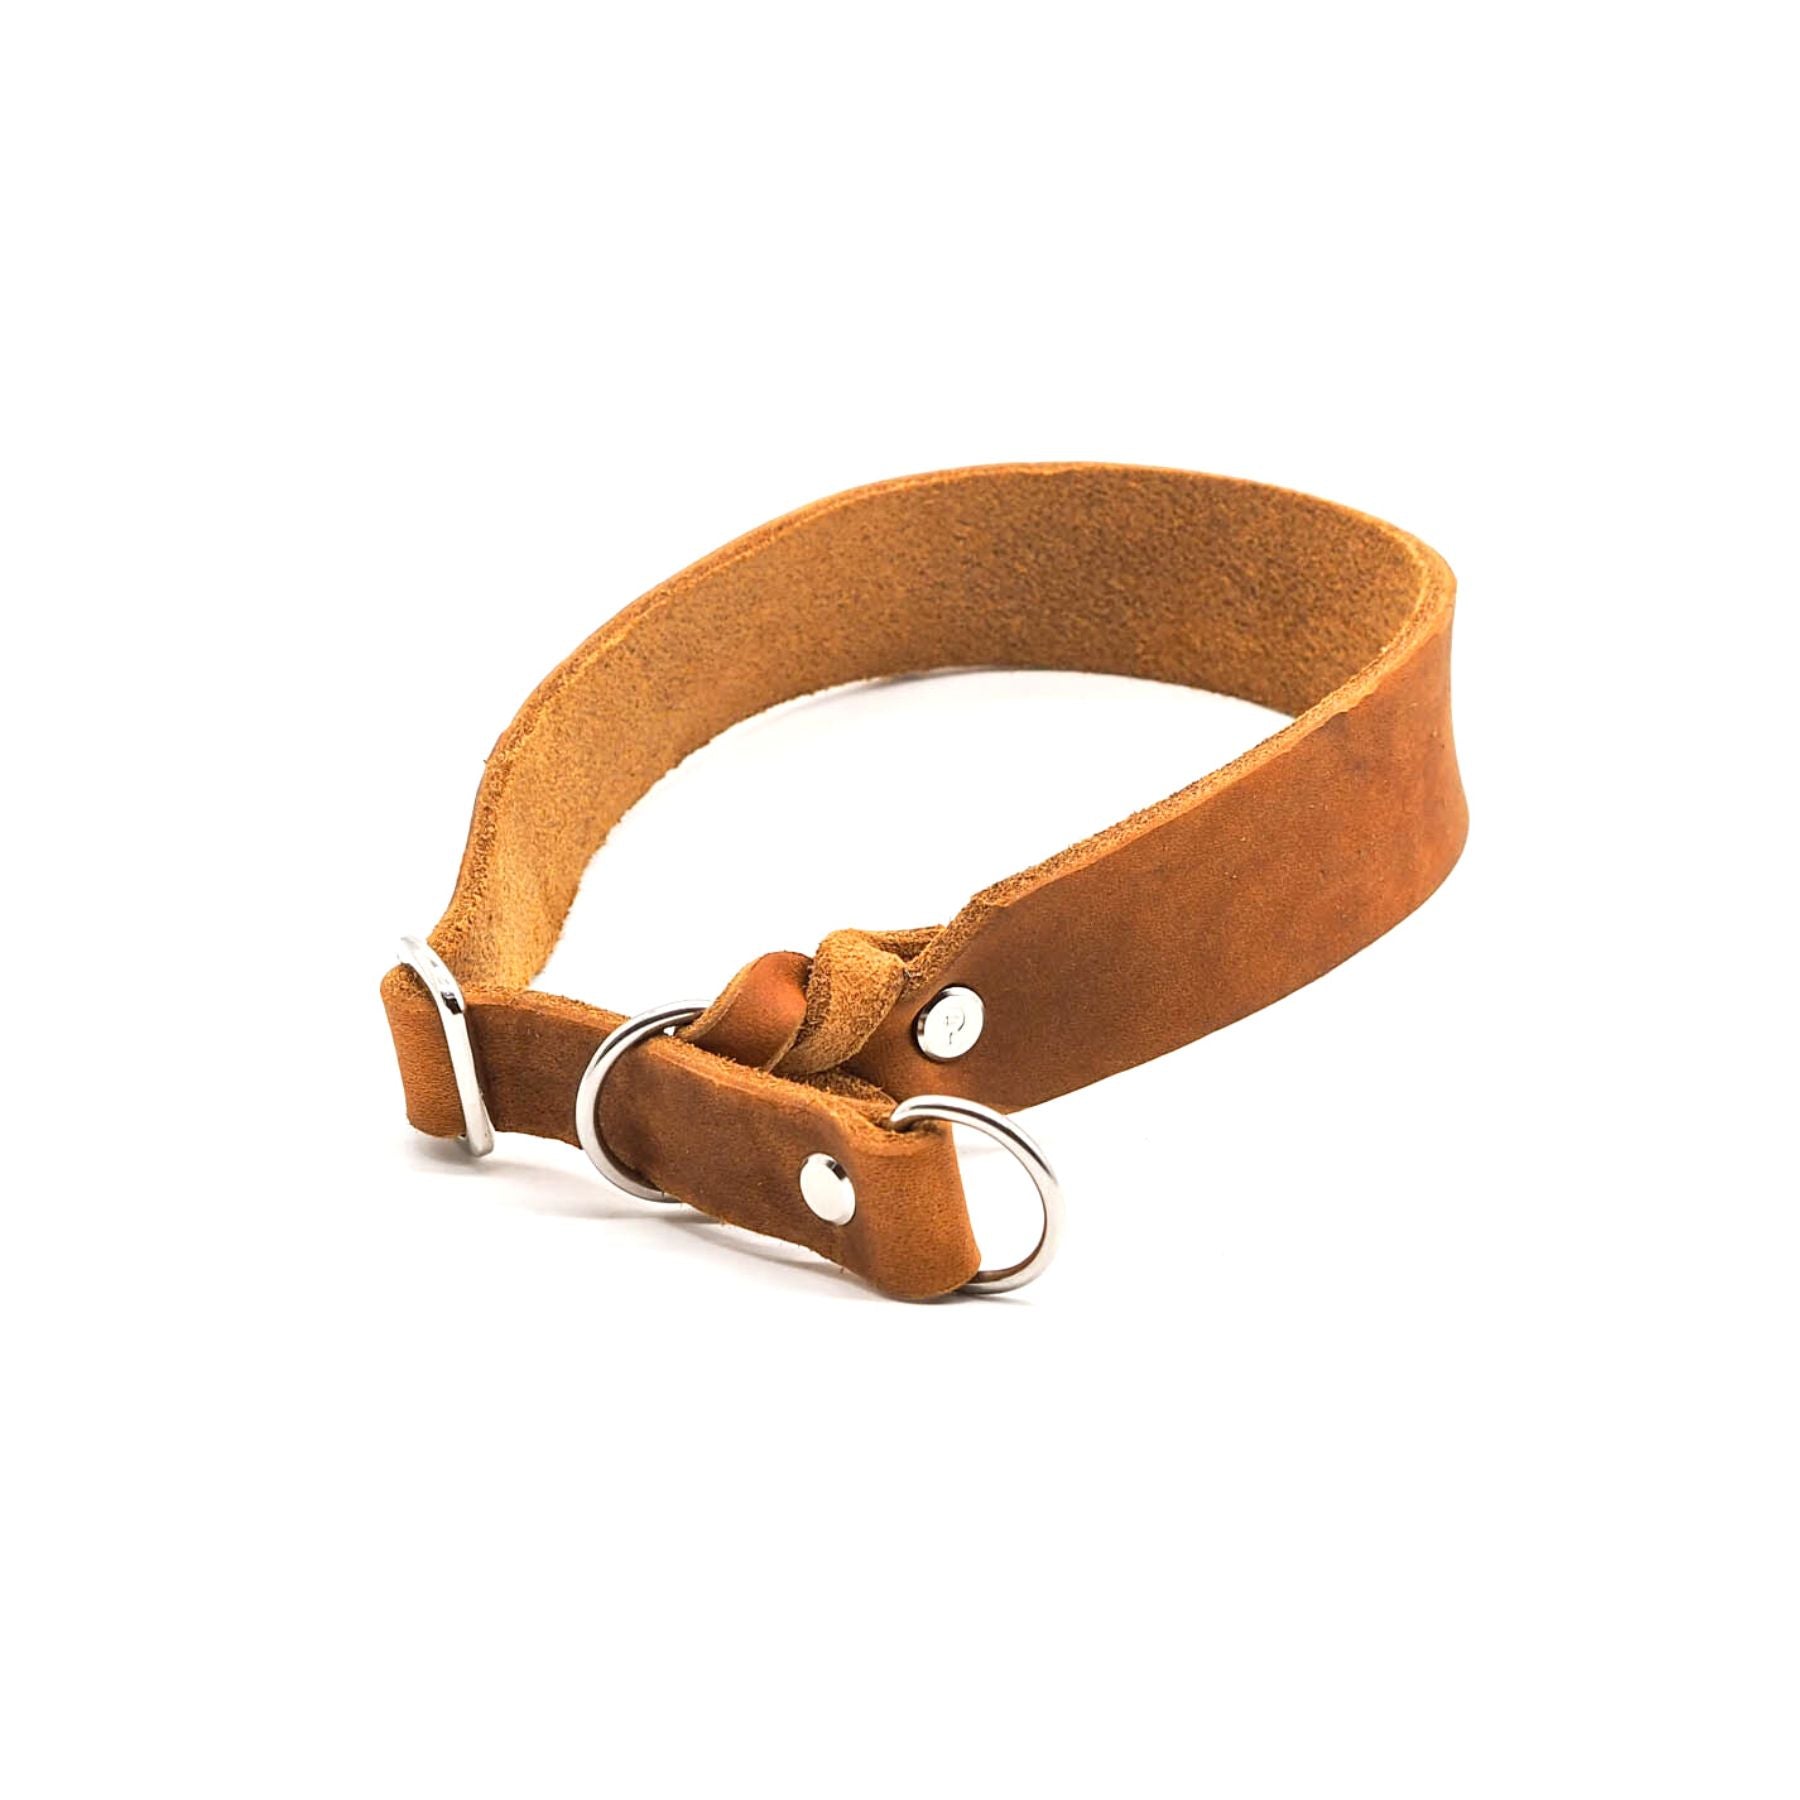 Pull stop collar made of greased leather 'Cognac'